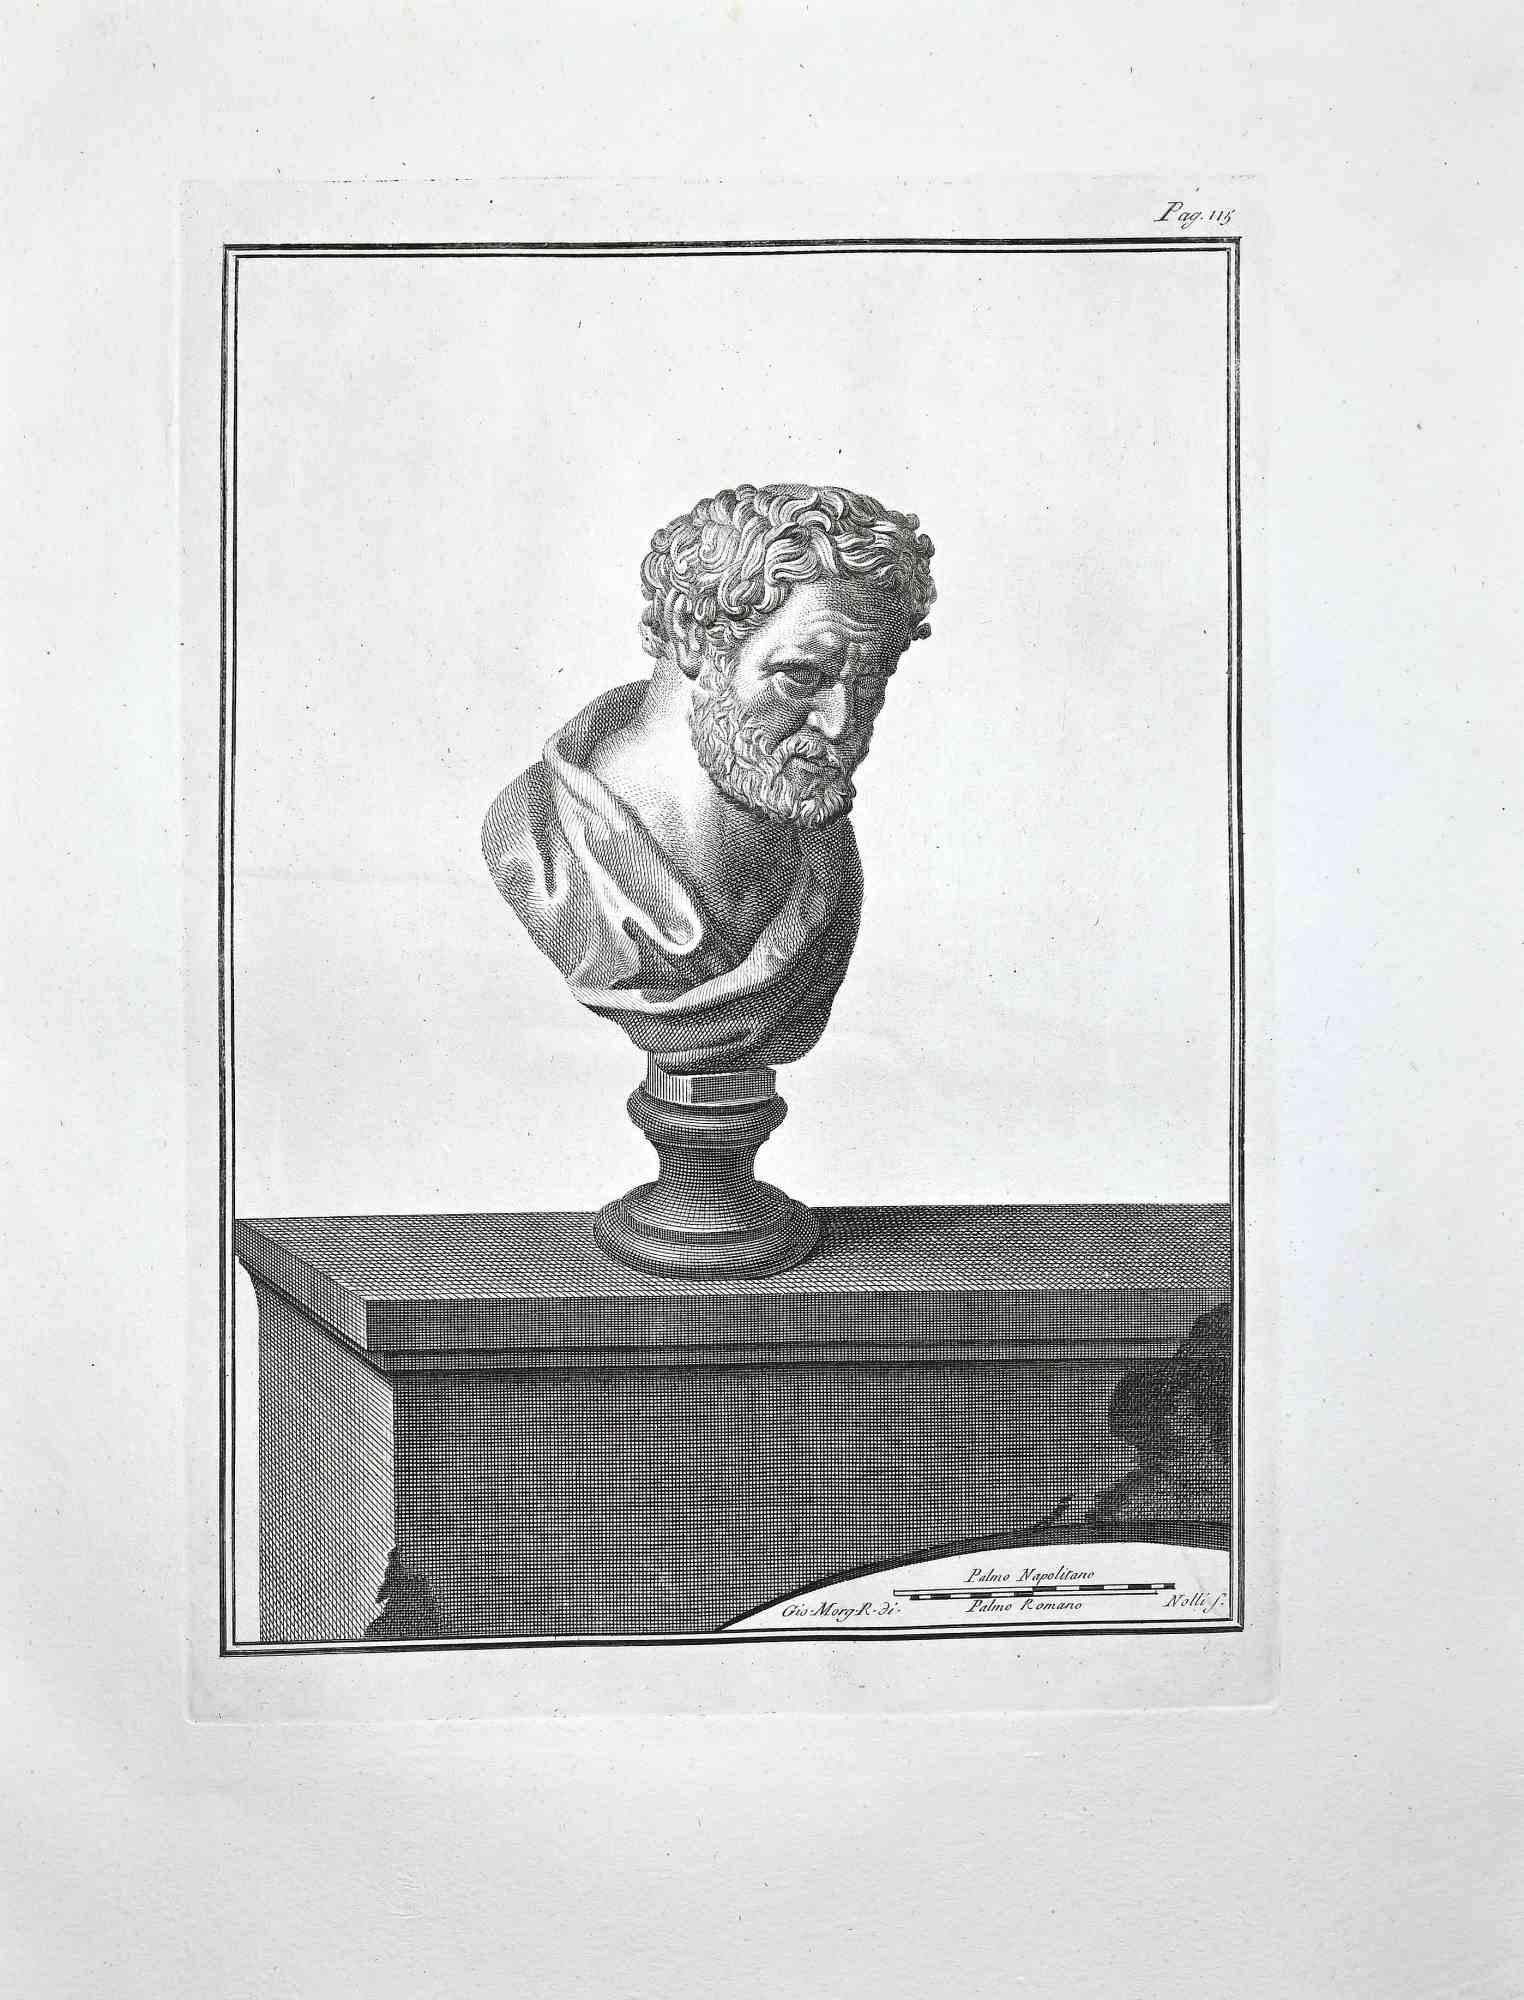 Ancient Roman Bust, from the series "Antiquities of Herculaneum", is an original etching on paper realized by Bernardino Nolli.

Signed on the plate, on the lower right.

Très bonnes conditions.

The etching belongs to the print suite “Antiquities